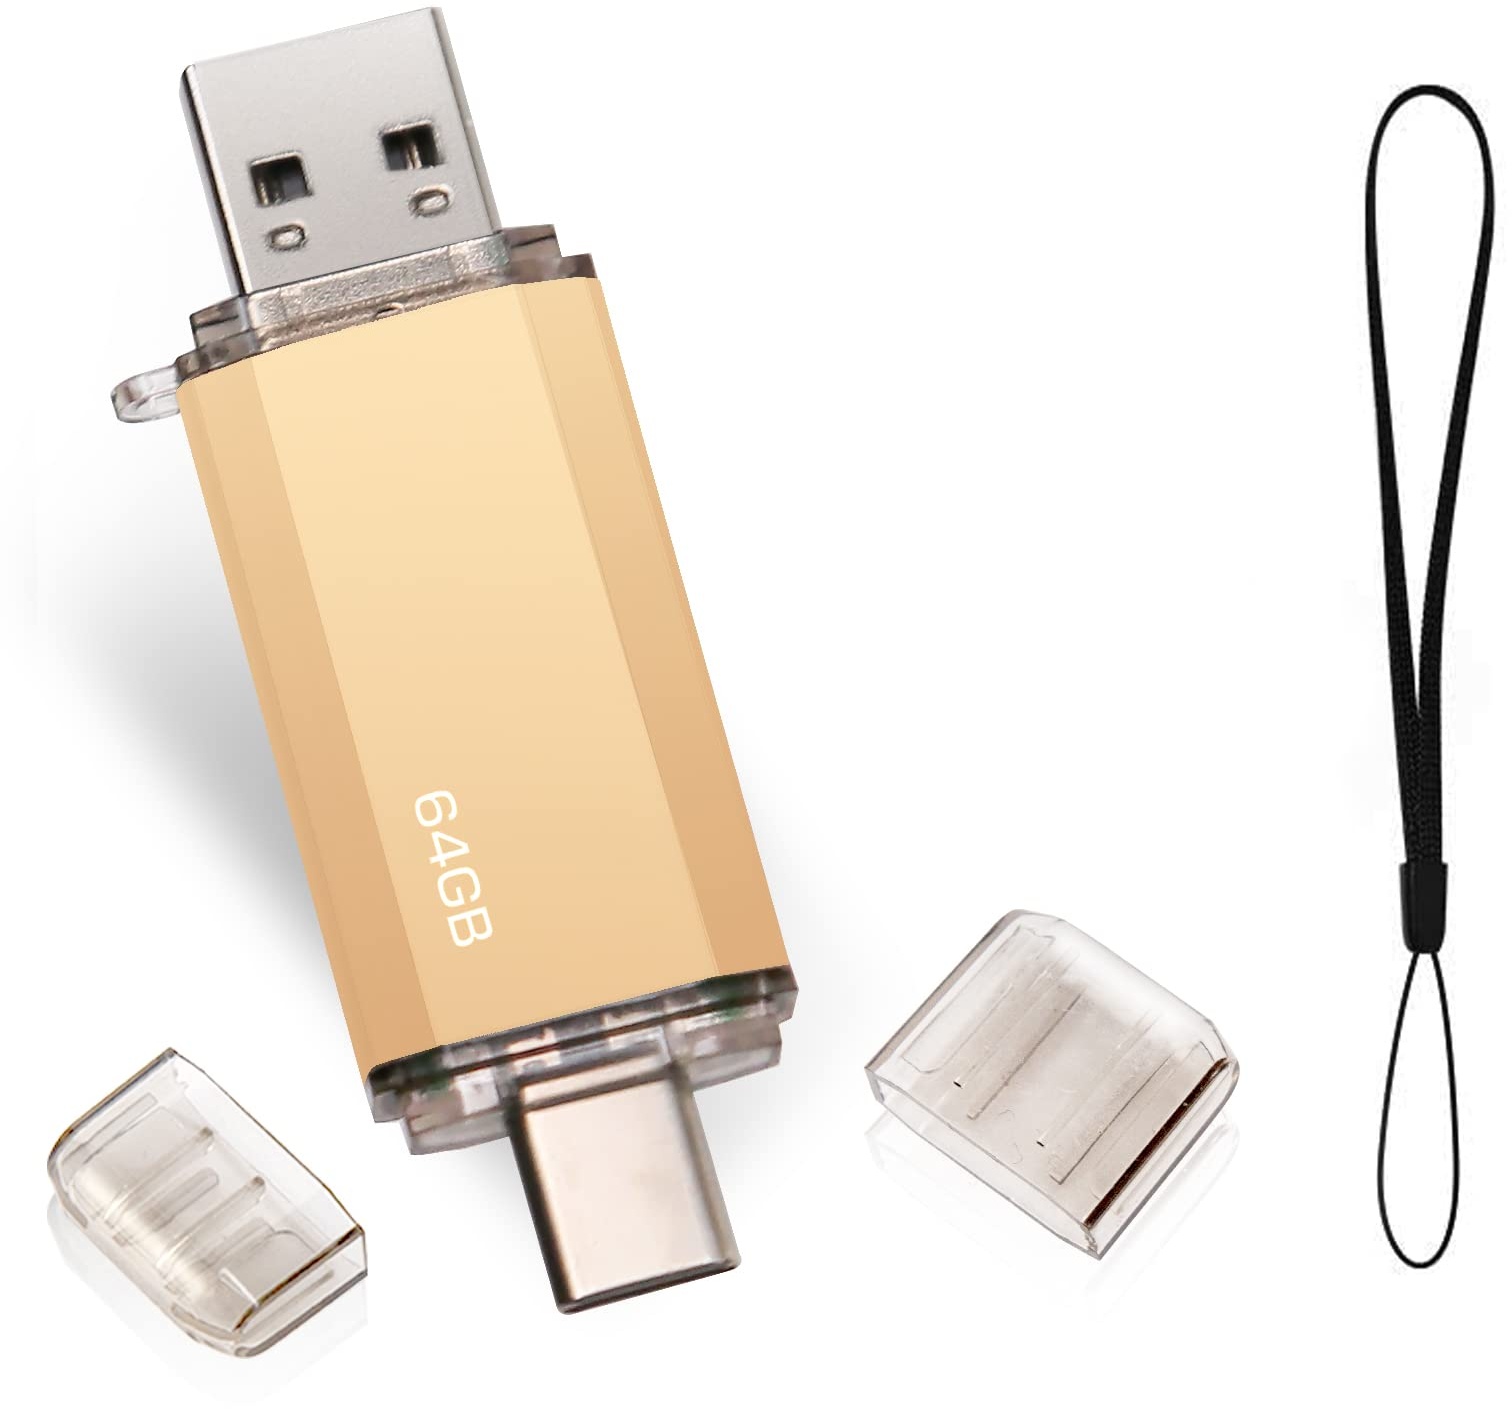 Type C USB Stick 64 GB, OTG USB C Memory Stick 64 GB 2-in-1 Type C Flash Drive 64 GB Mini Memory Stick External Pen Drive for MacBook Pro, Android Mobile Phone, Pad, Laptop and Computer (Gold)